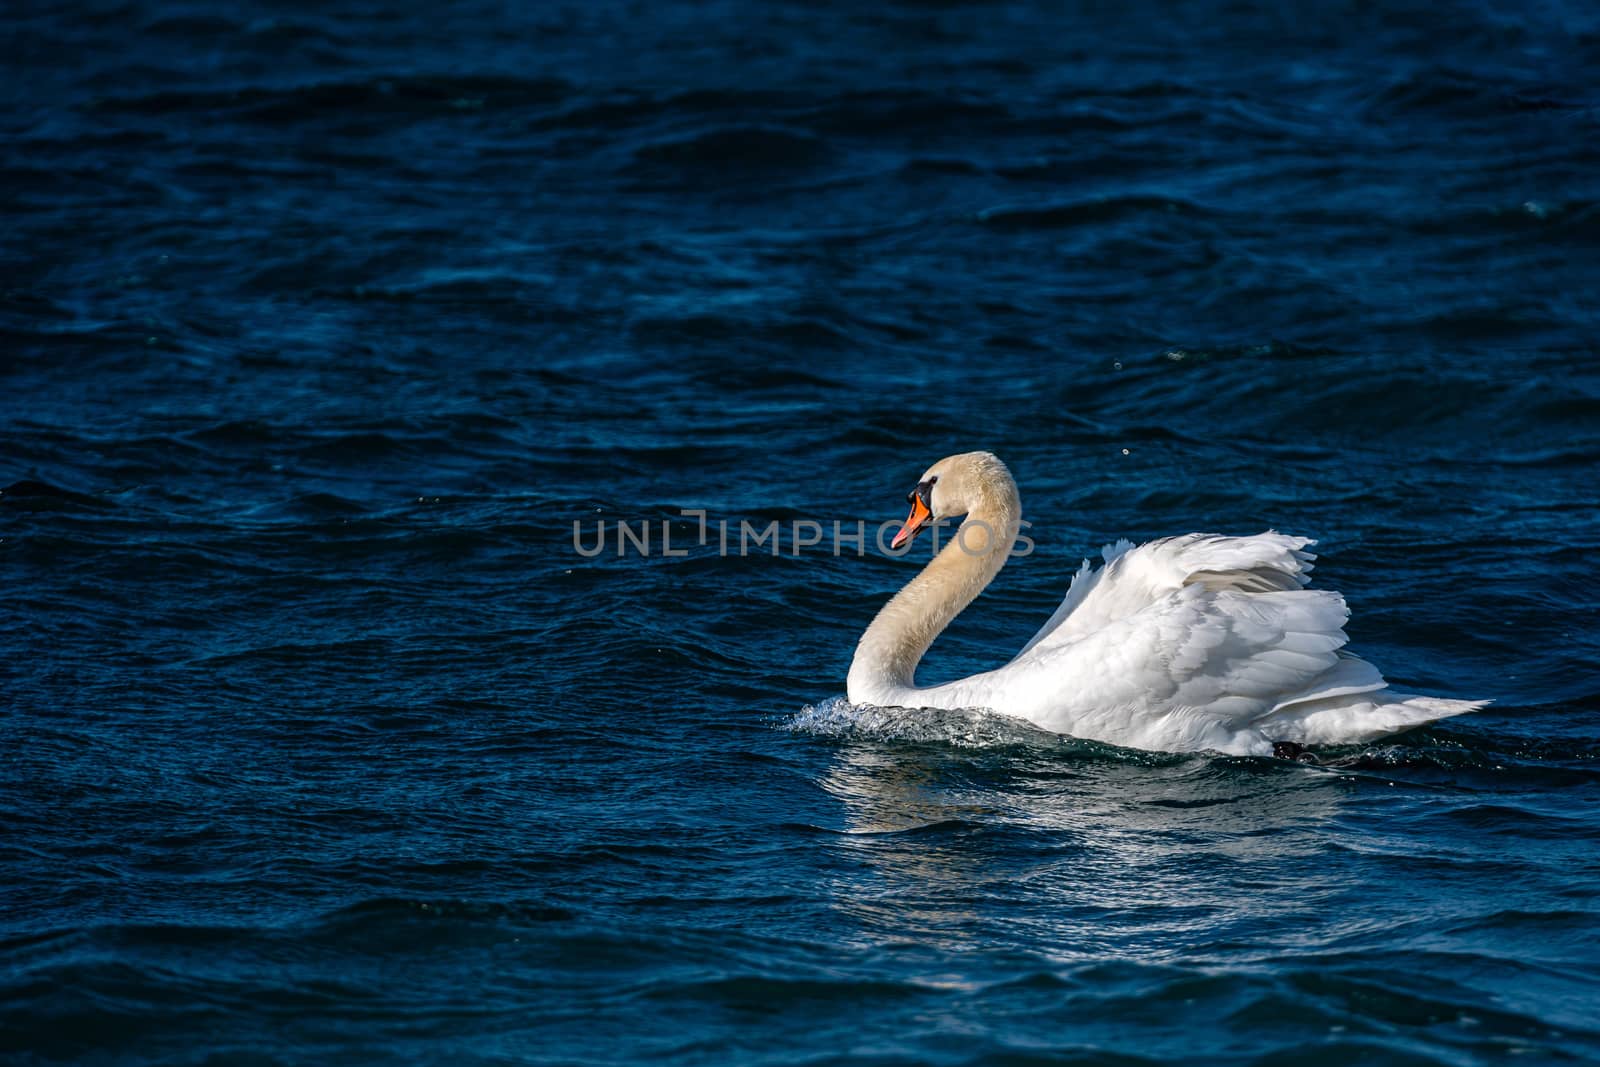 White swan swimming in the blue lake, close up view - image